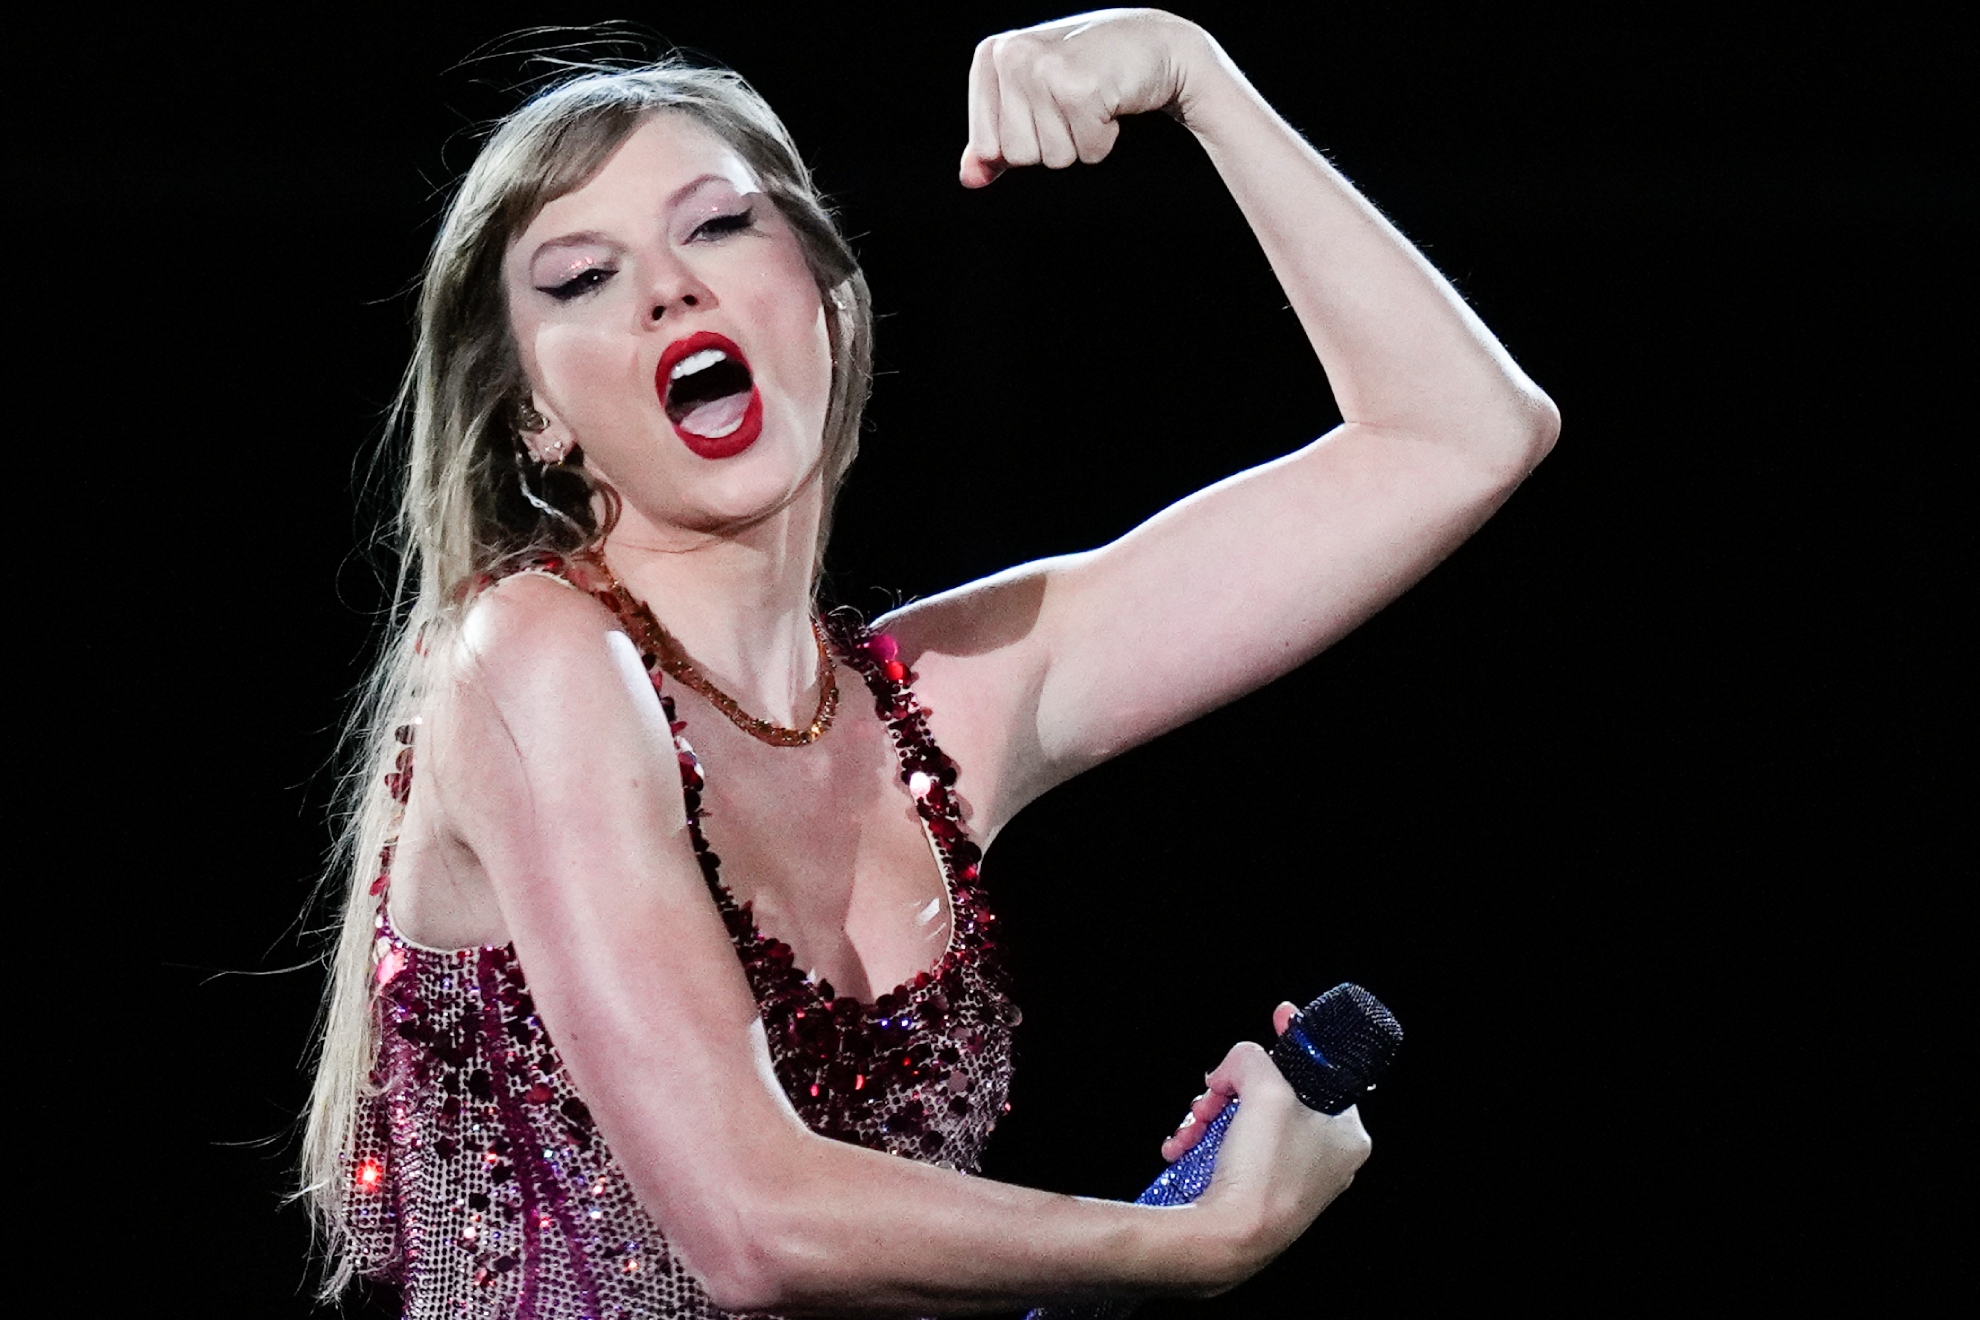 "Taylor Swift is the real Barbie":  Singer continues show despite breaking her heel during concert